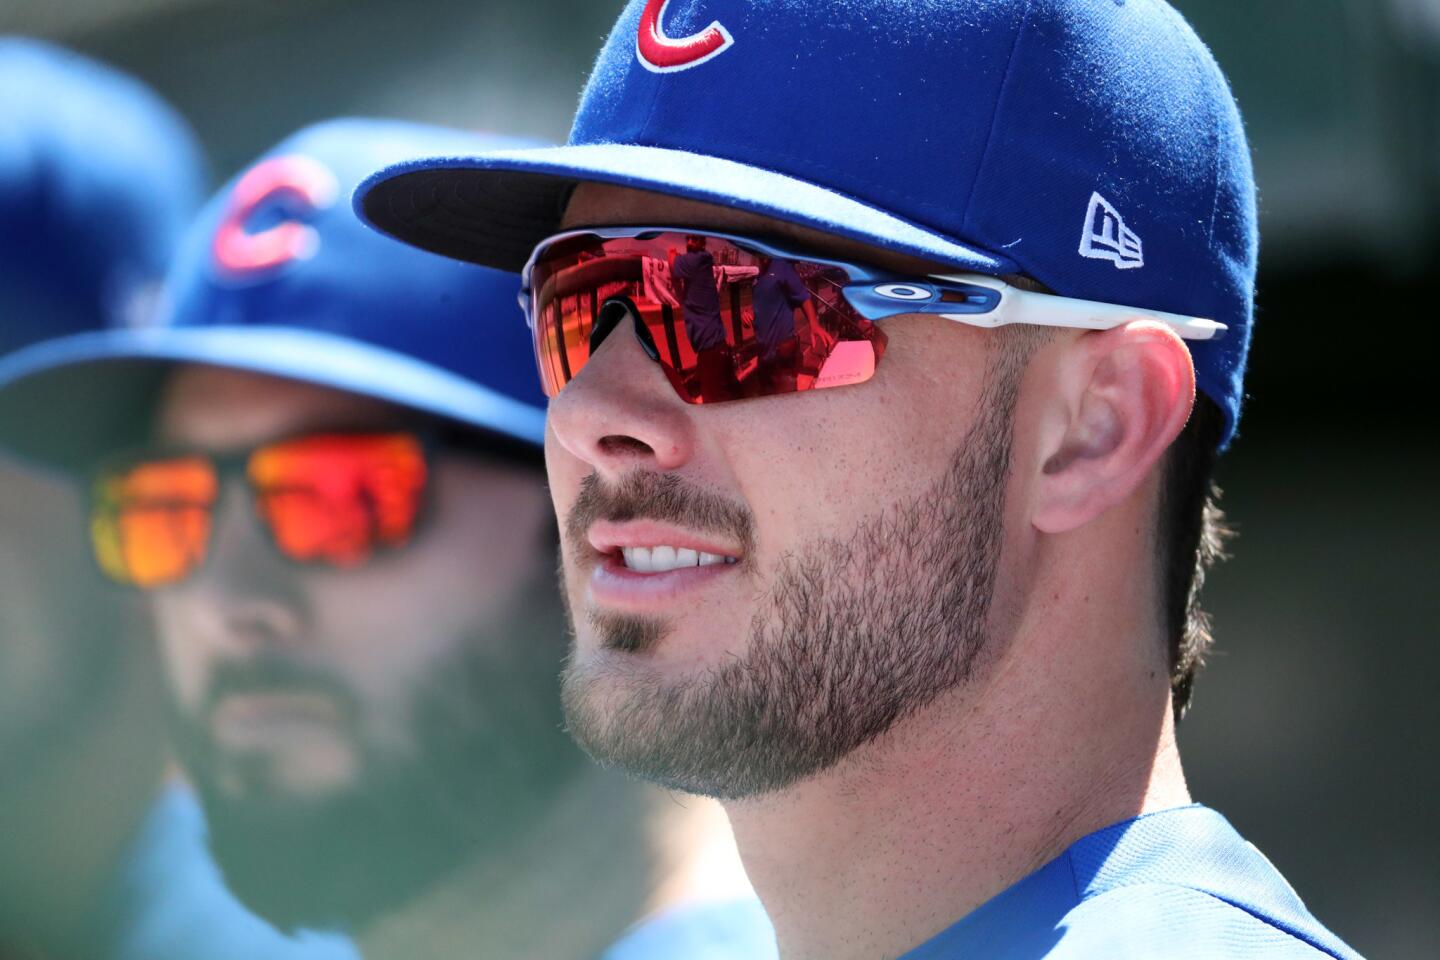 Cubs third baseman Kris Bryant sits in the dugout Wednesday, July 25, 2018 at Wrigley Field.